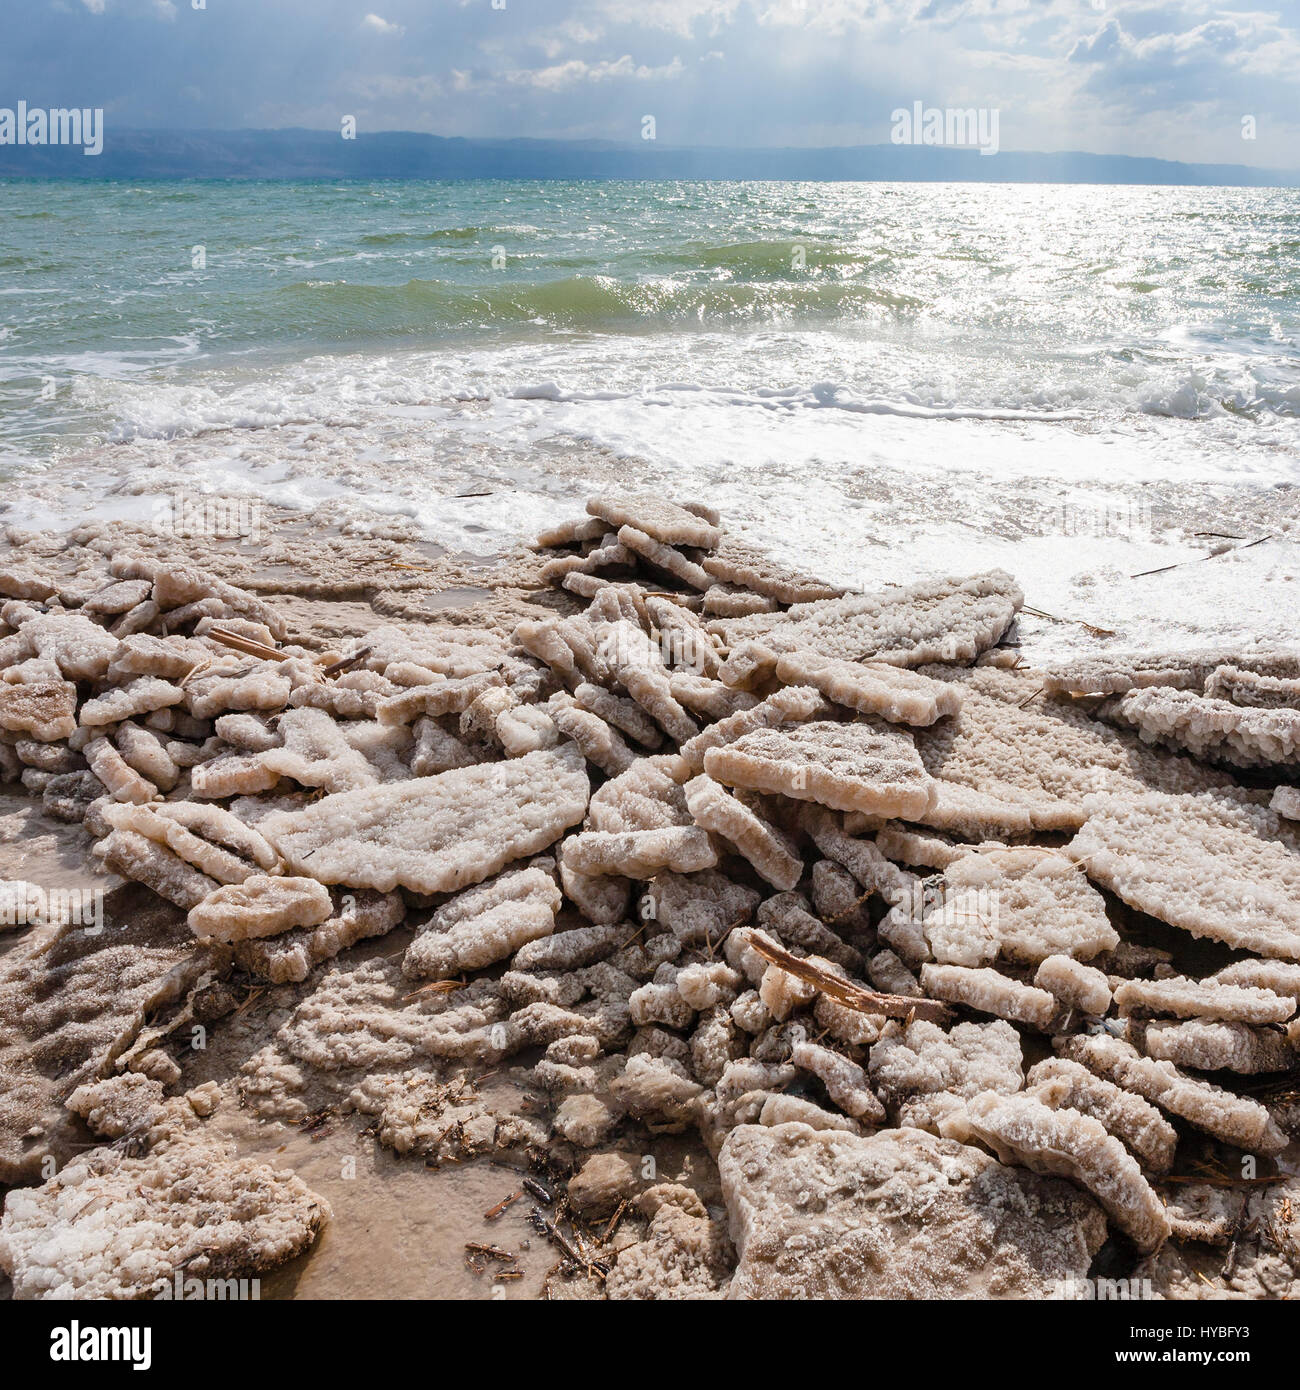 Travel to Middle East country Kingdom of Jordan - natural salt on shore of Dead Sea in winter Stock Photo